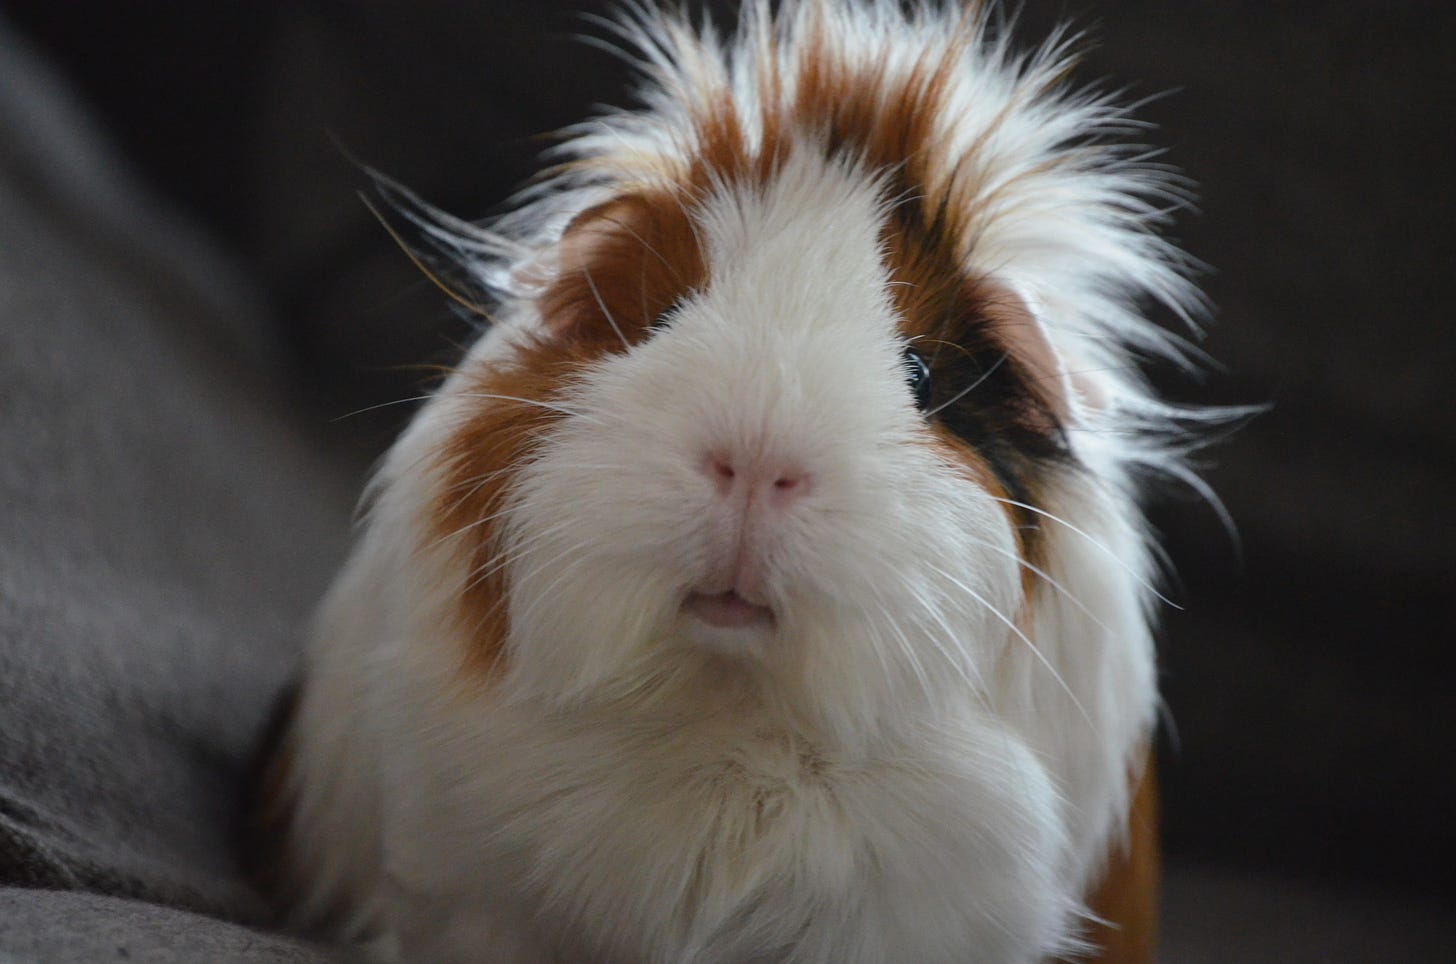 A furry guinea pig that rather resembles a Porg from Star Wars